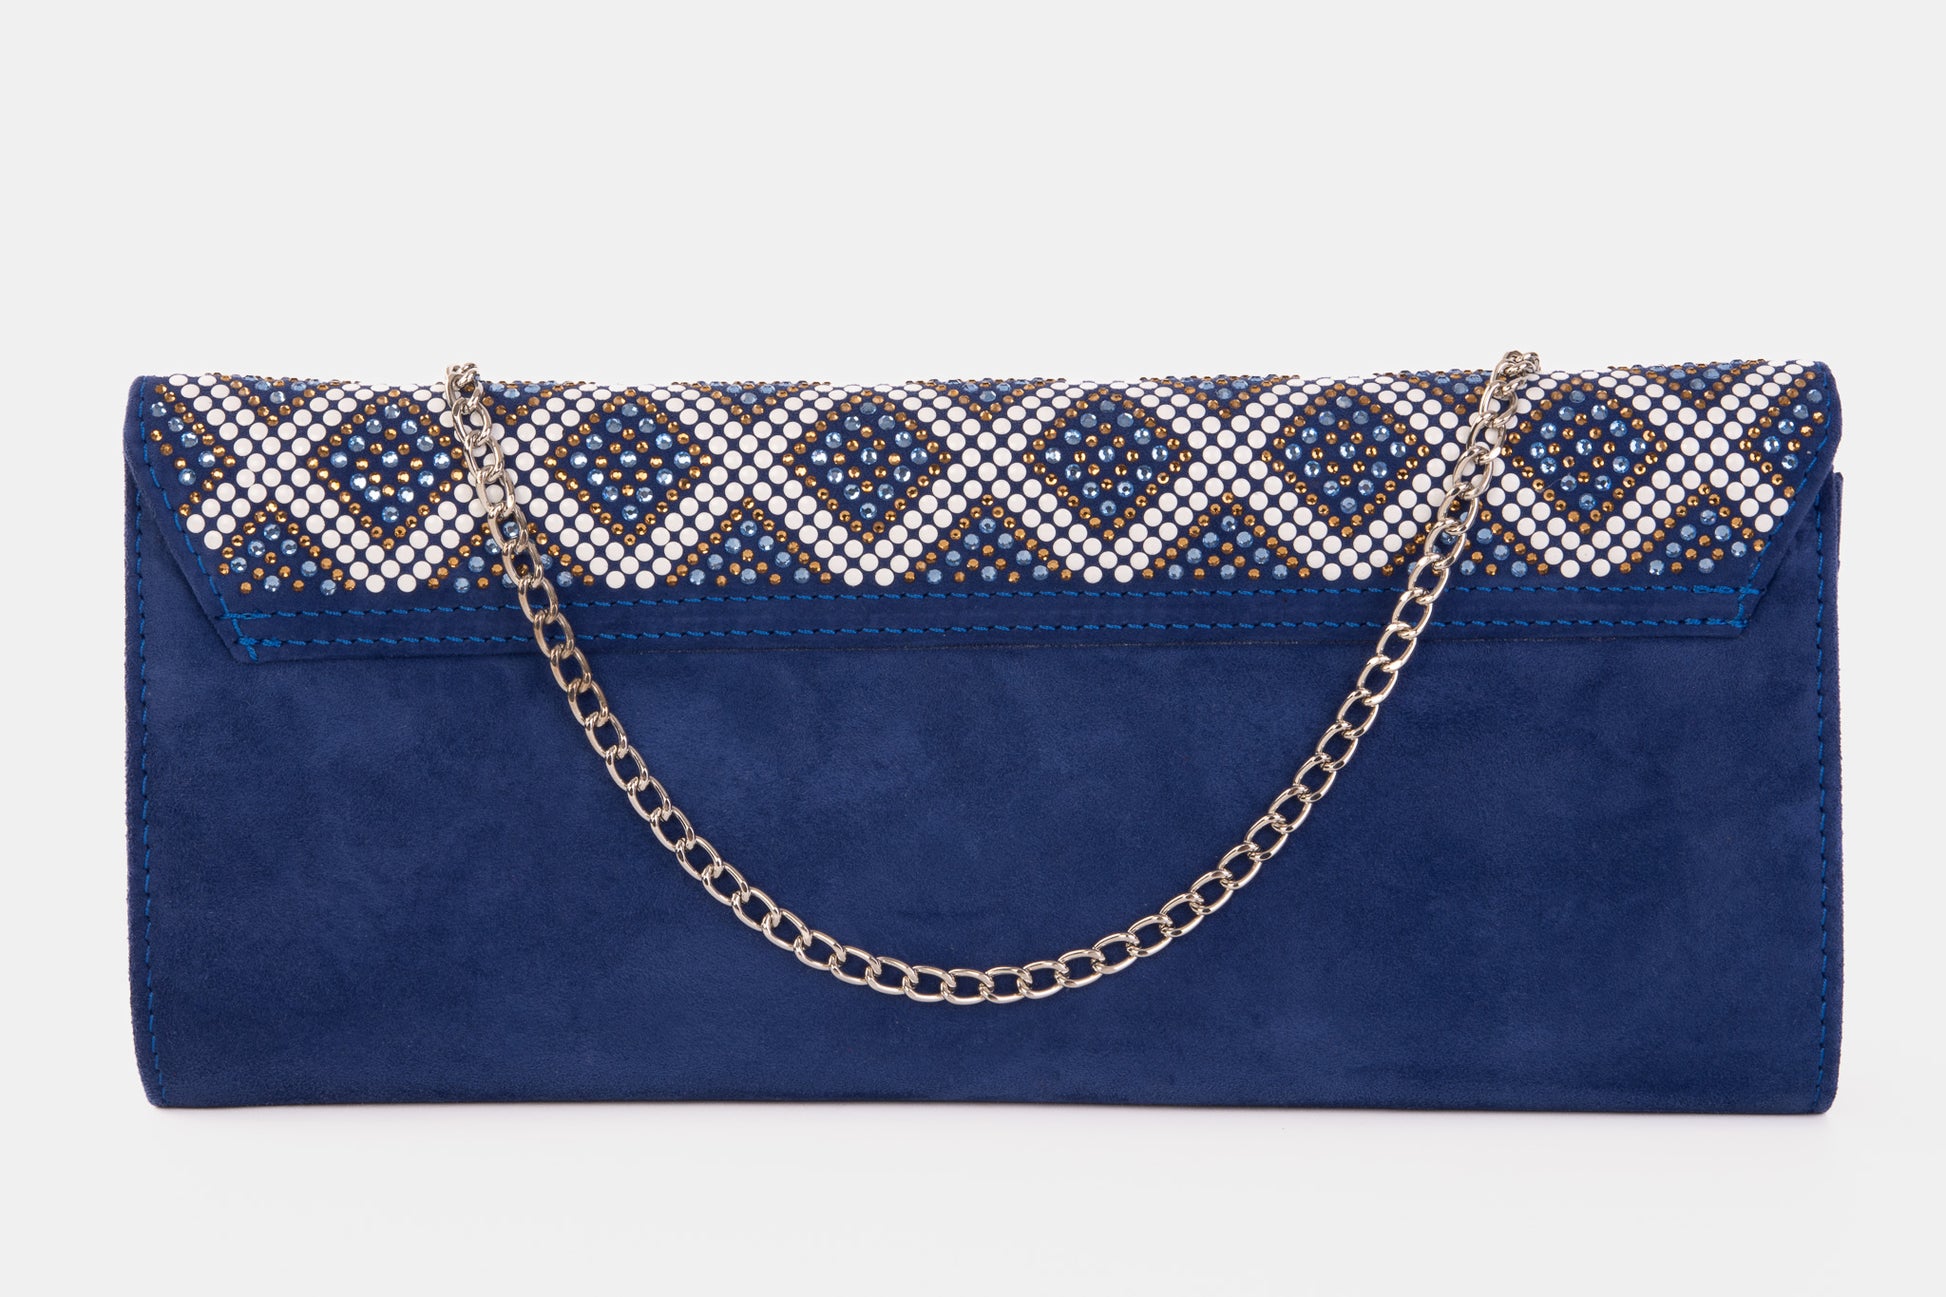 The Nampula Sax Blue Glitter Suede Leather Clutch – Vinci Leather Shoes